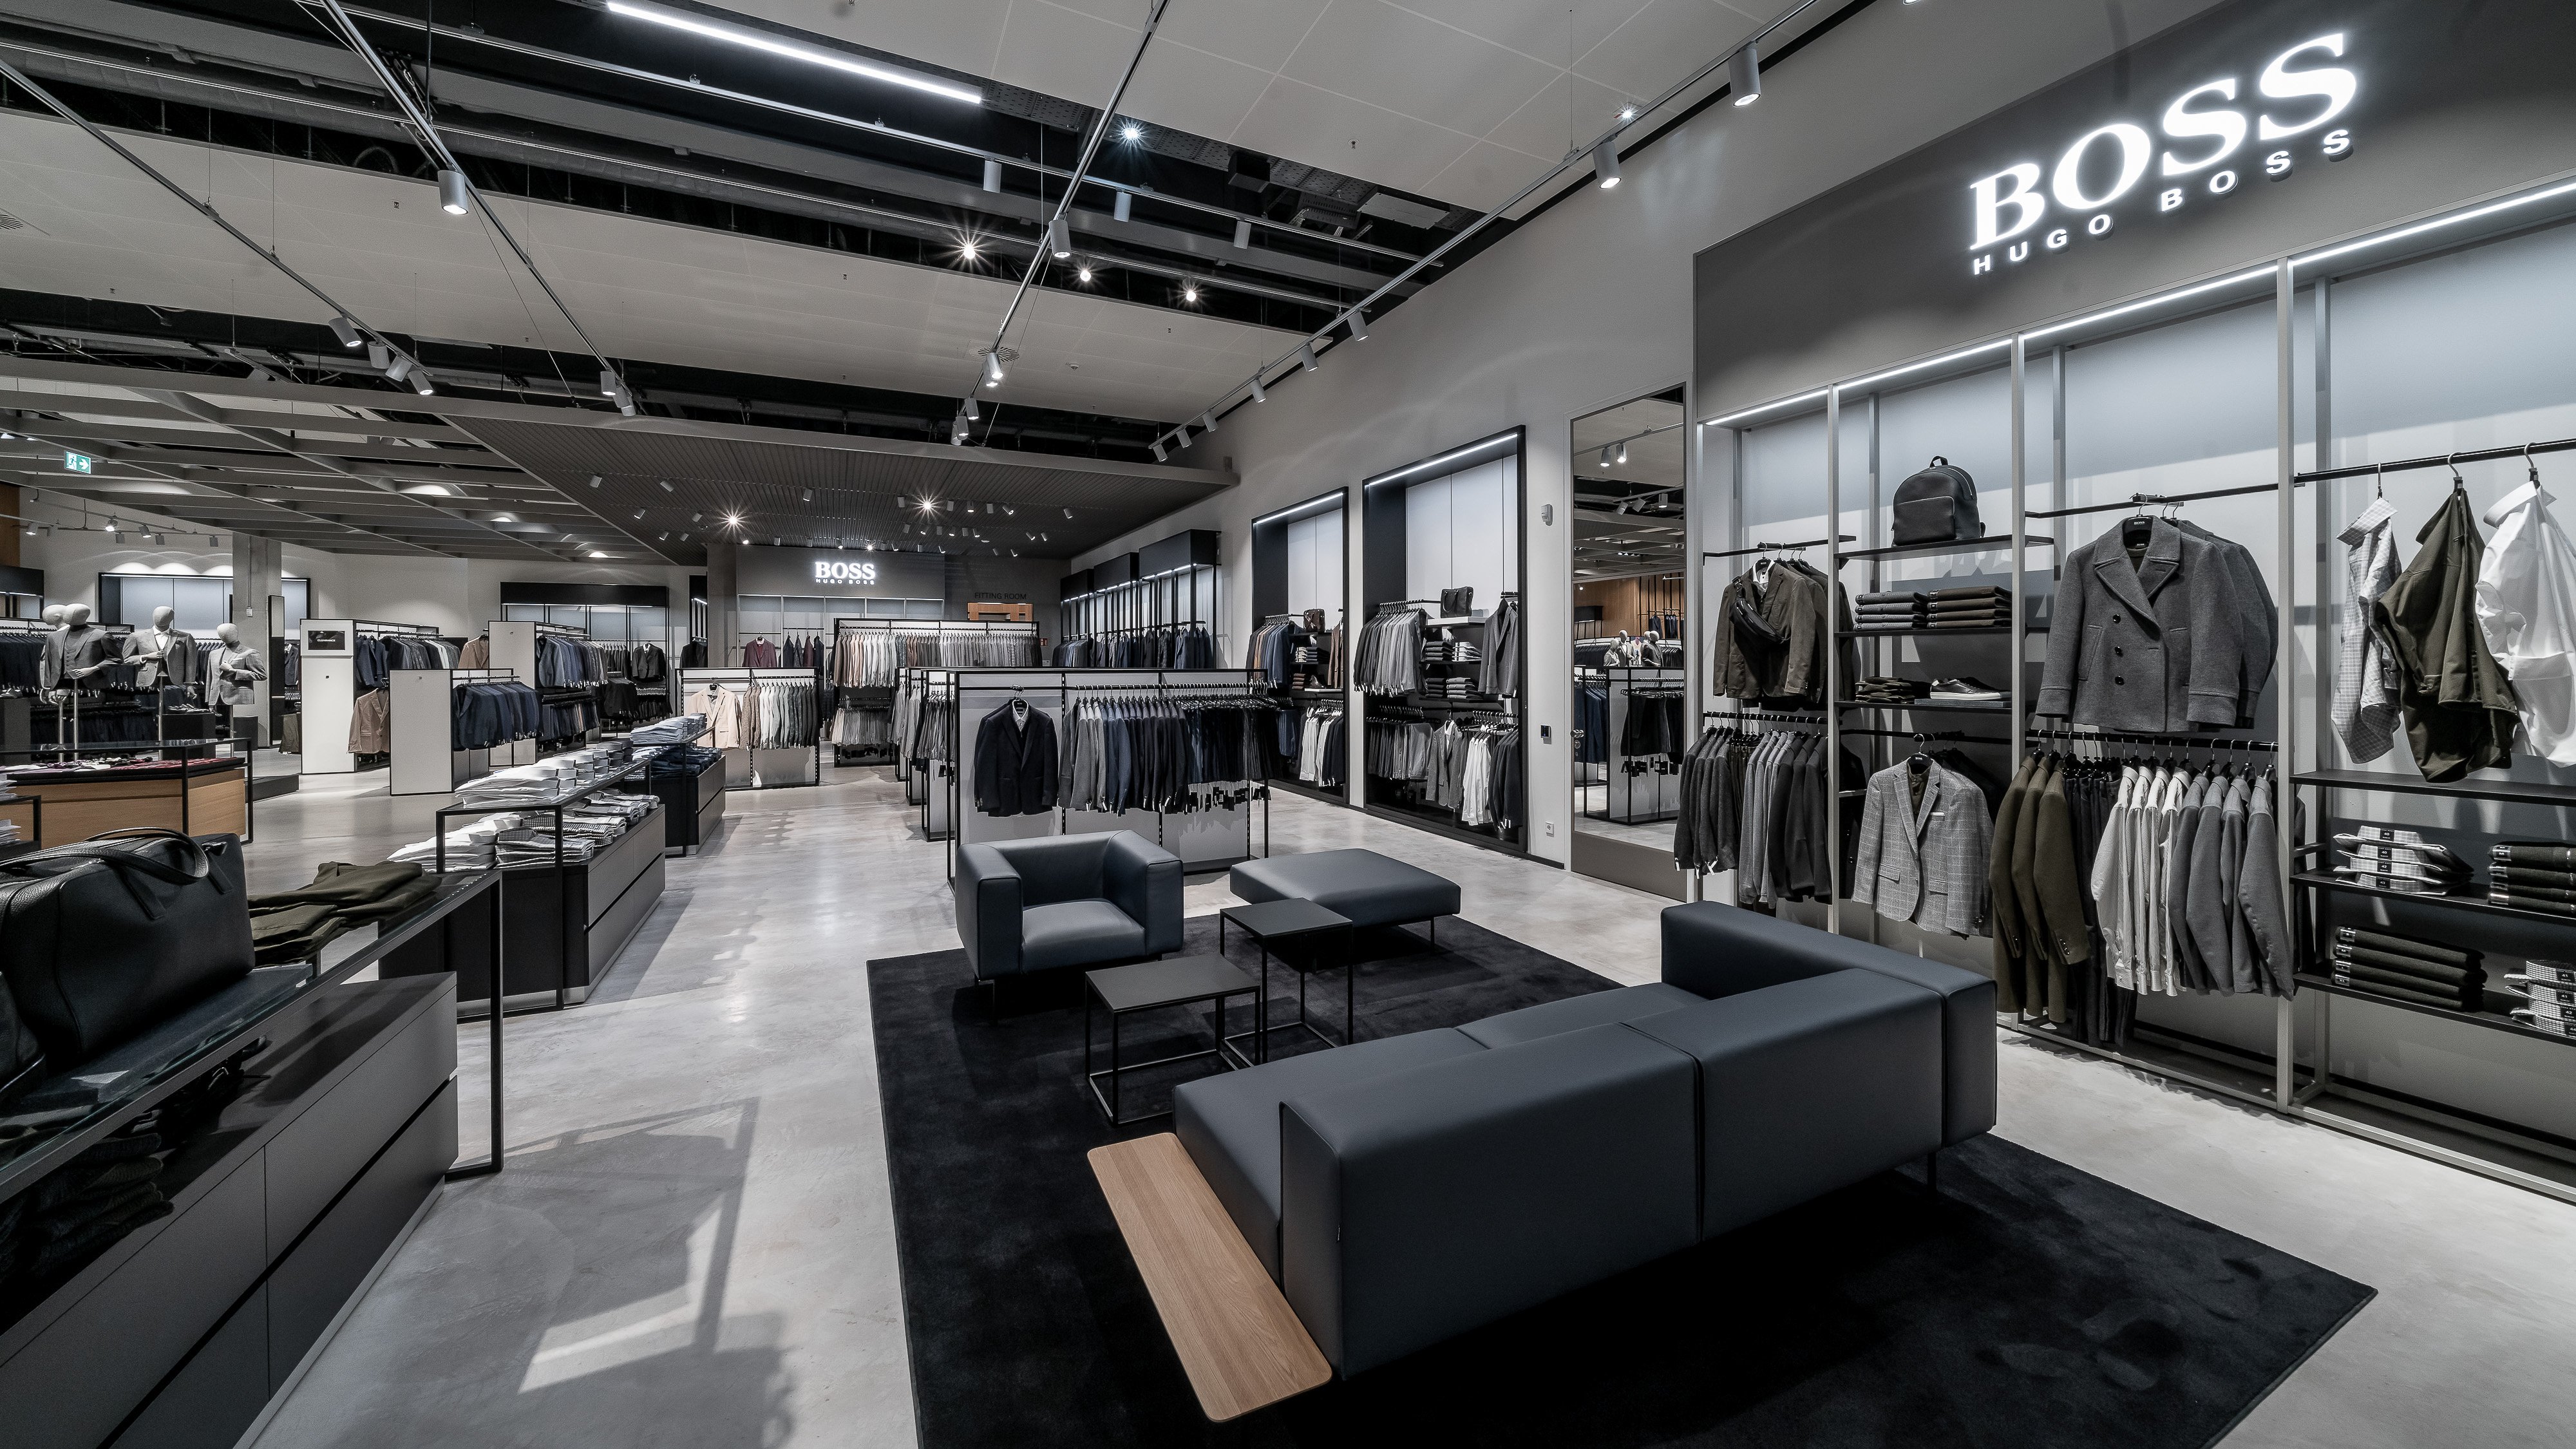 HUGO BOSS Corporate on Twitter: "Yesterday, we celebrated the opening of our BOSS Outlet Store in Outletcity, with an event attended by 500 guests. The 5,216-square-meter store emphasizes sustainable store